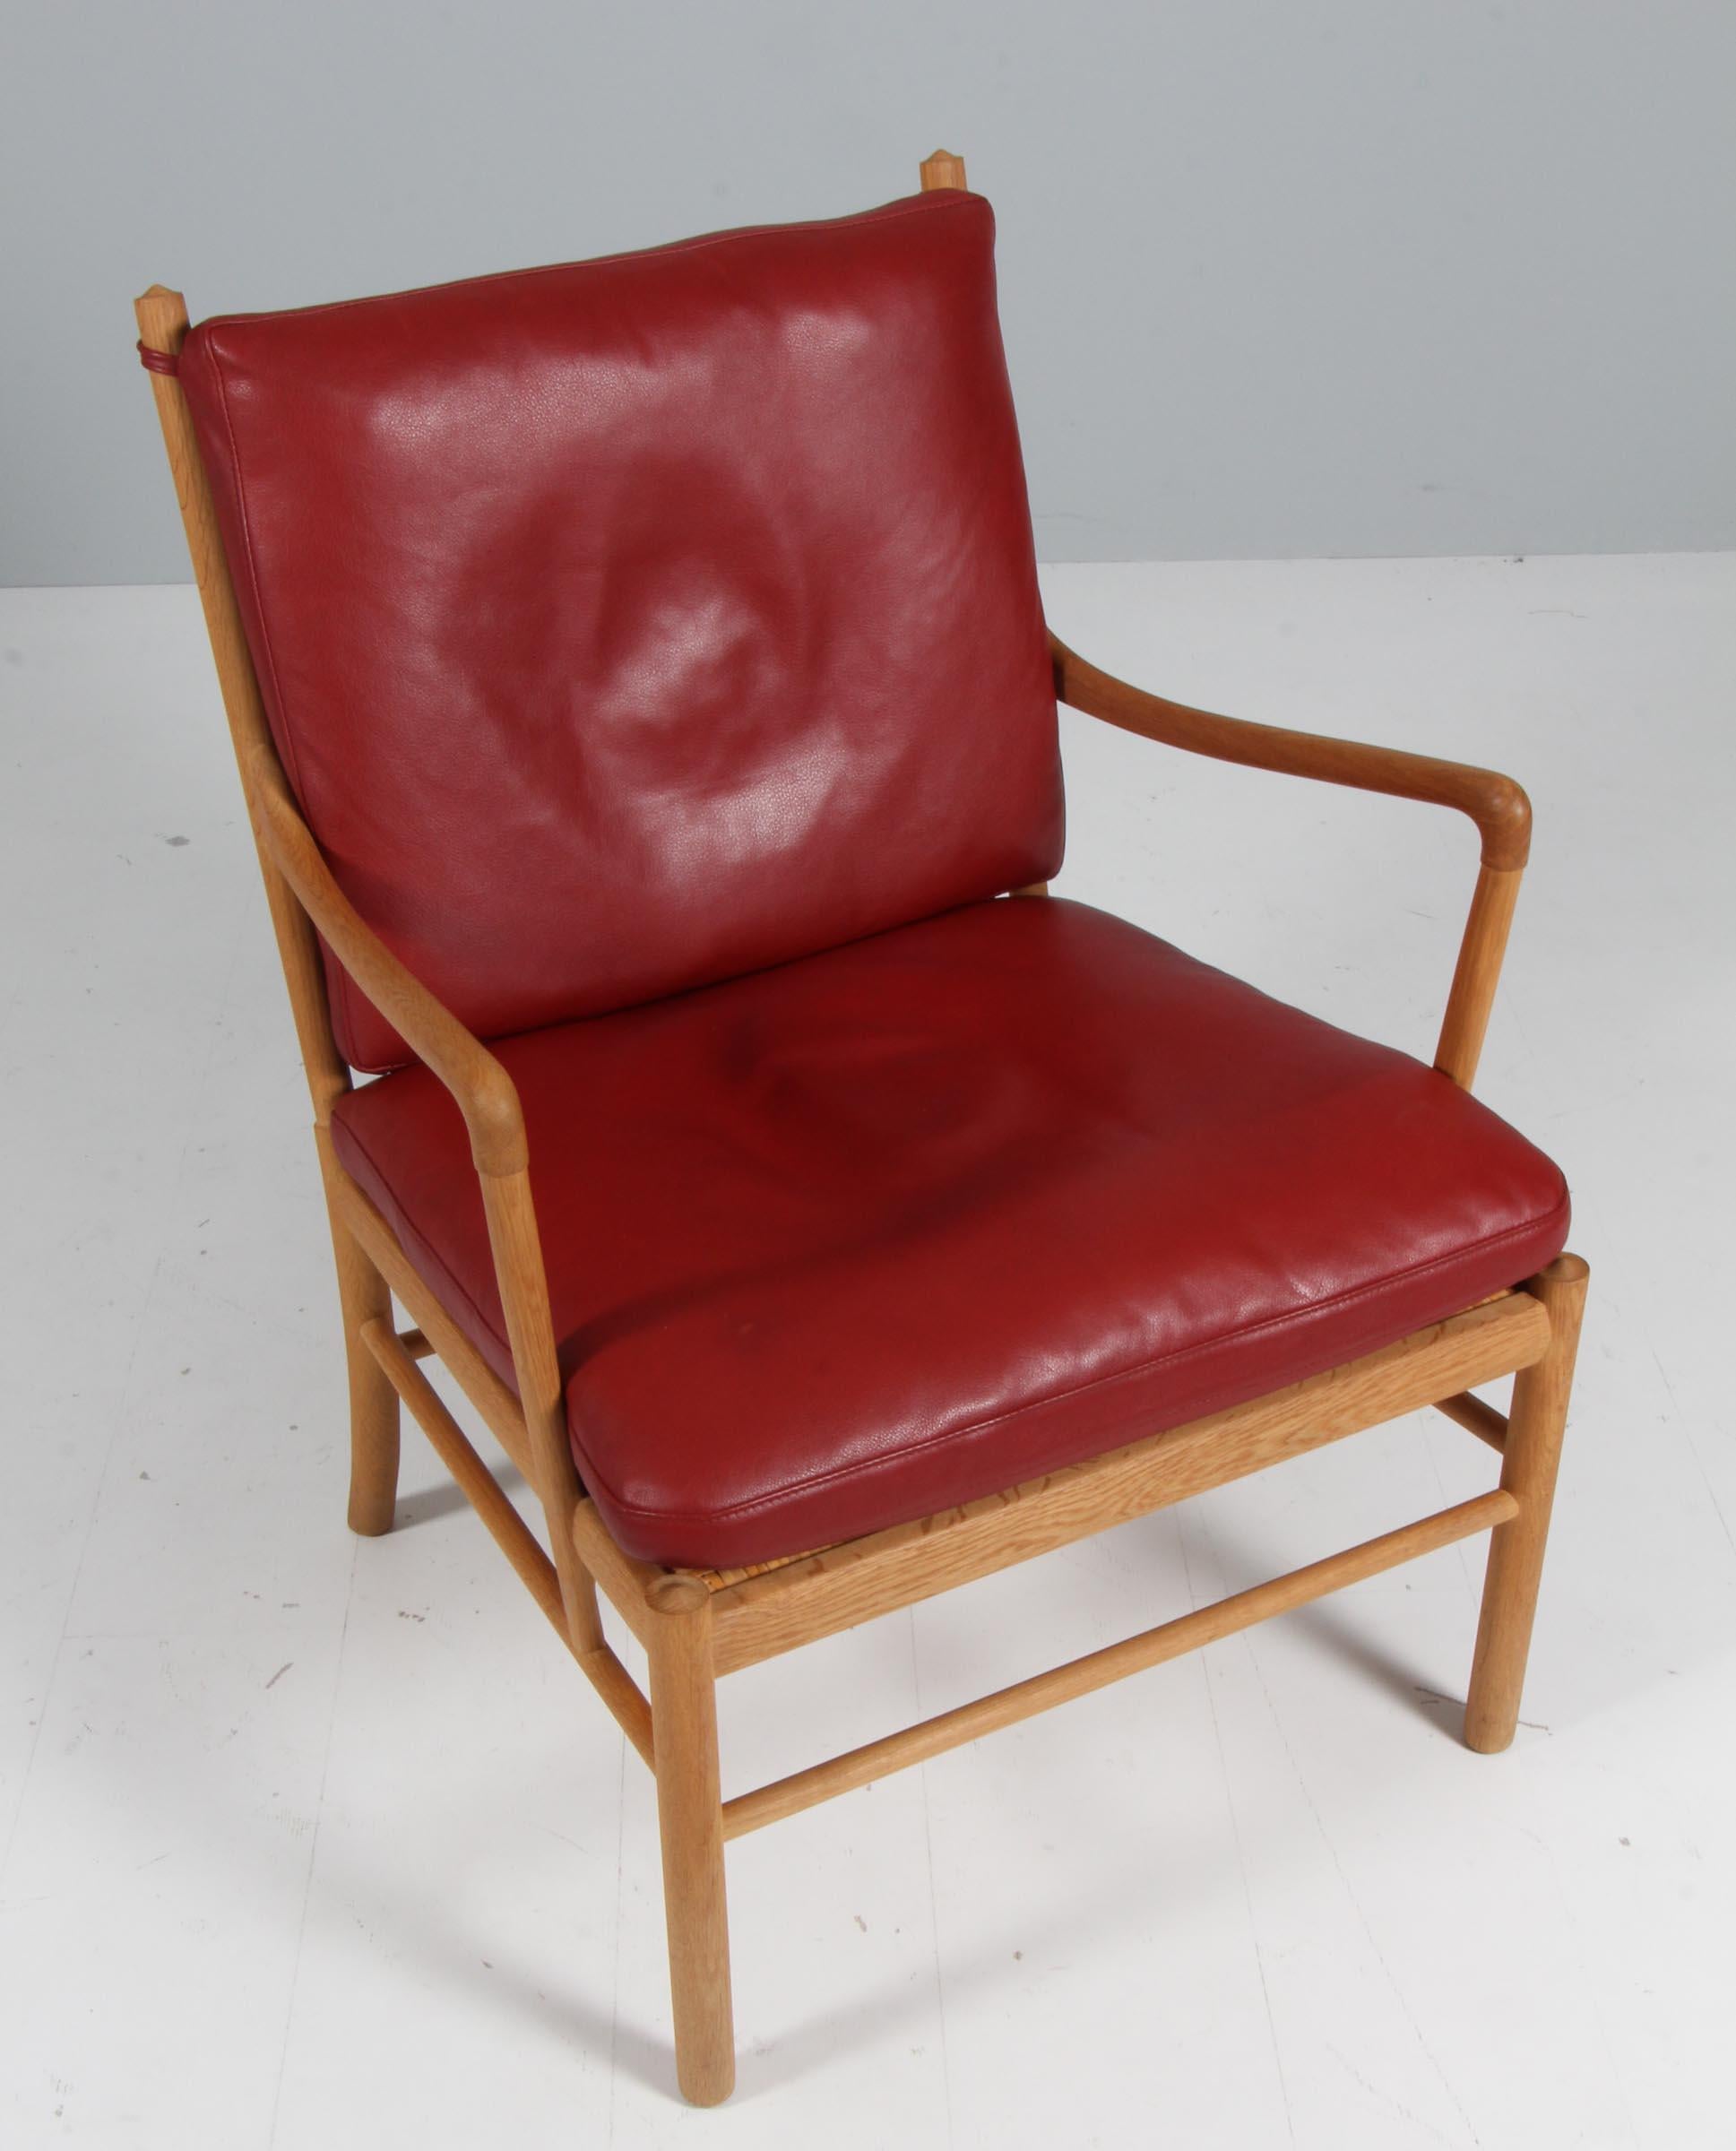 Ole Wanscher lounge chair original upholstered with red leather.

Made in oak.

Model PJ149 colonial chair, made by Poul jeppesen.